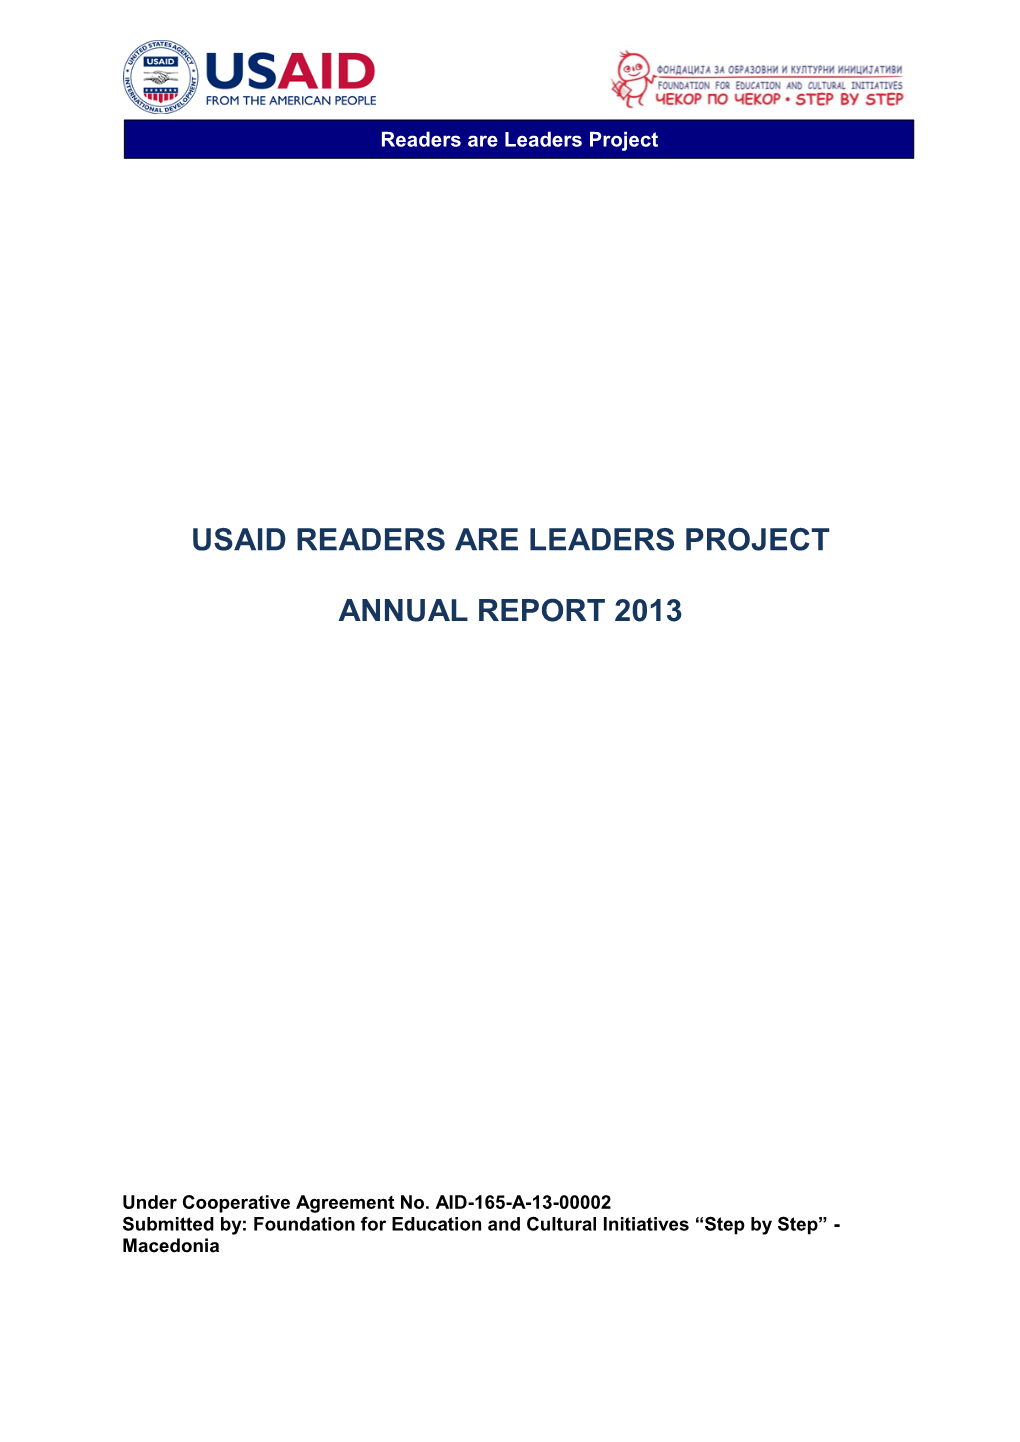 Readers Are Leaders Quarterly Report